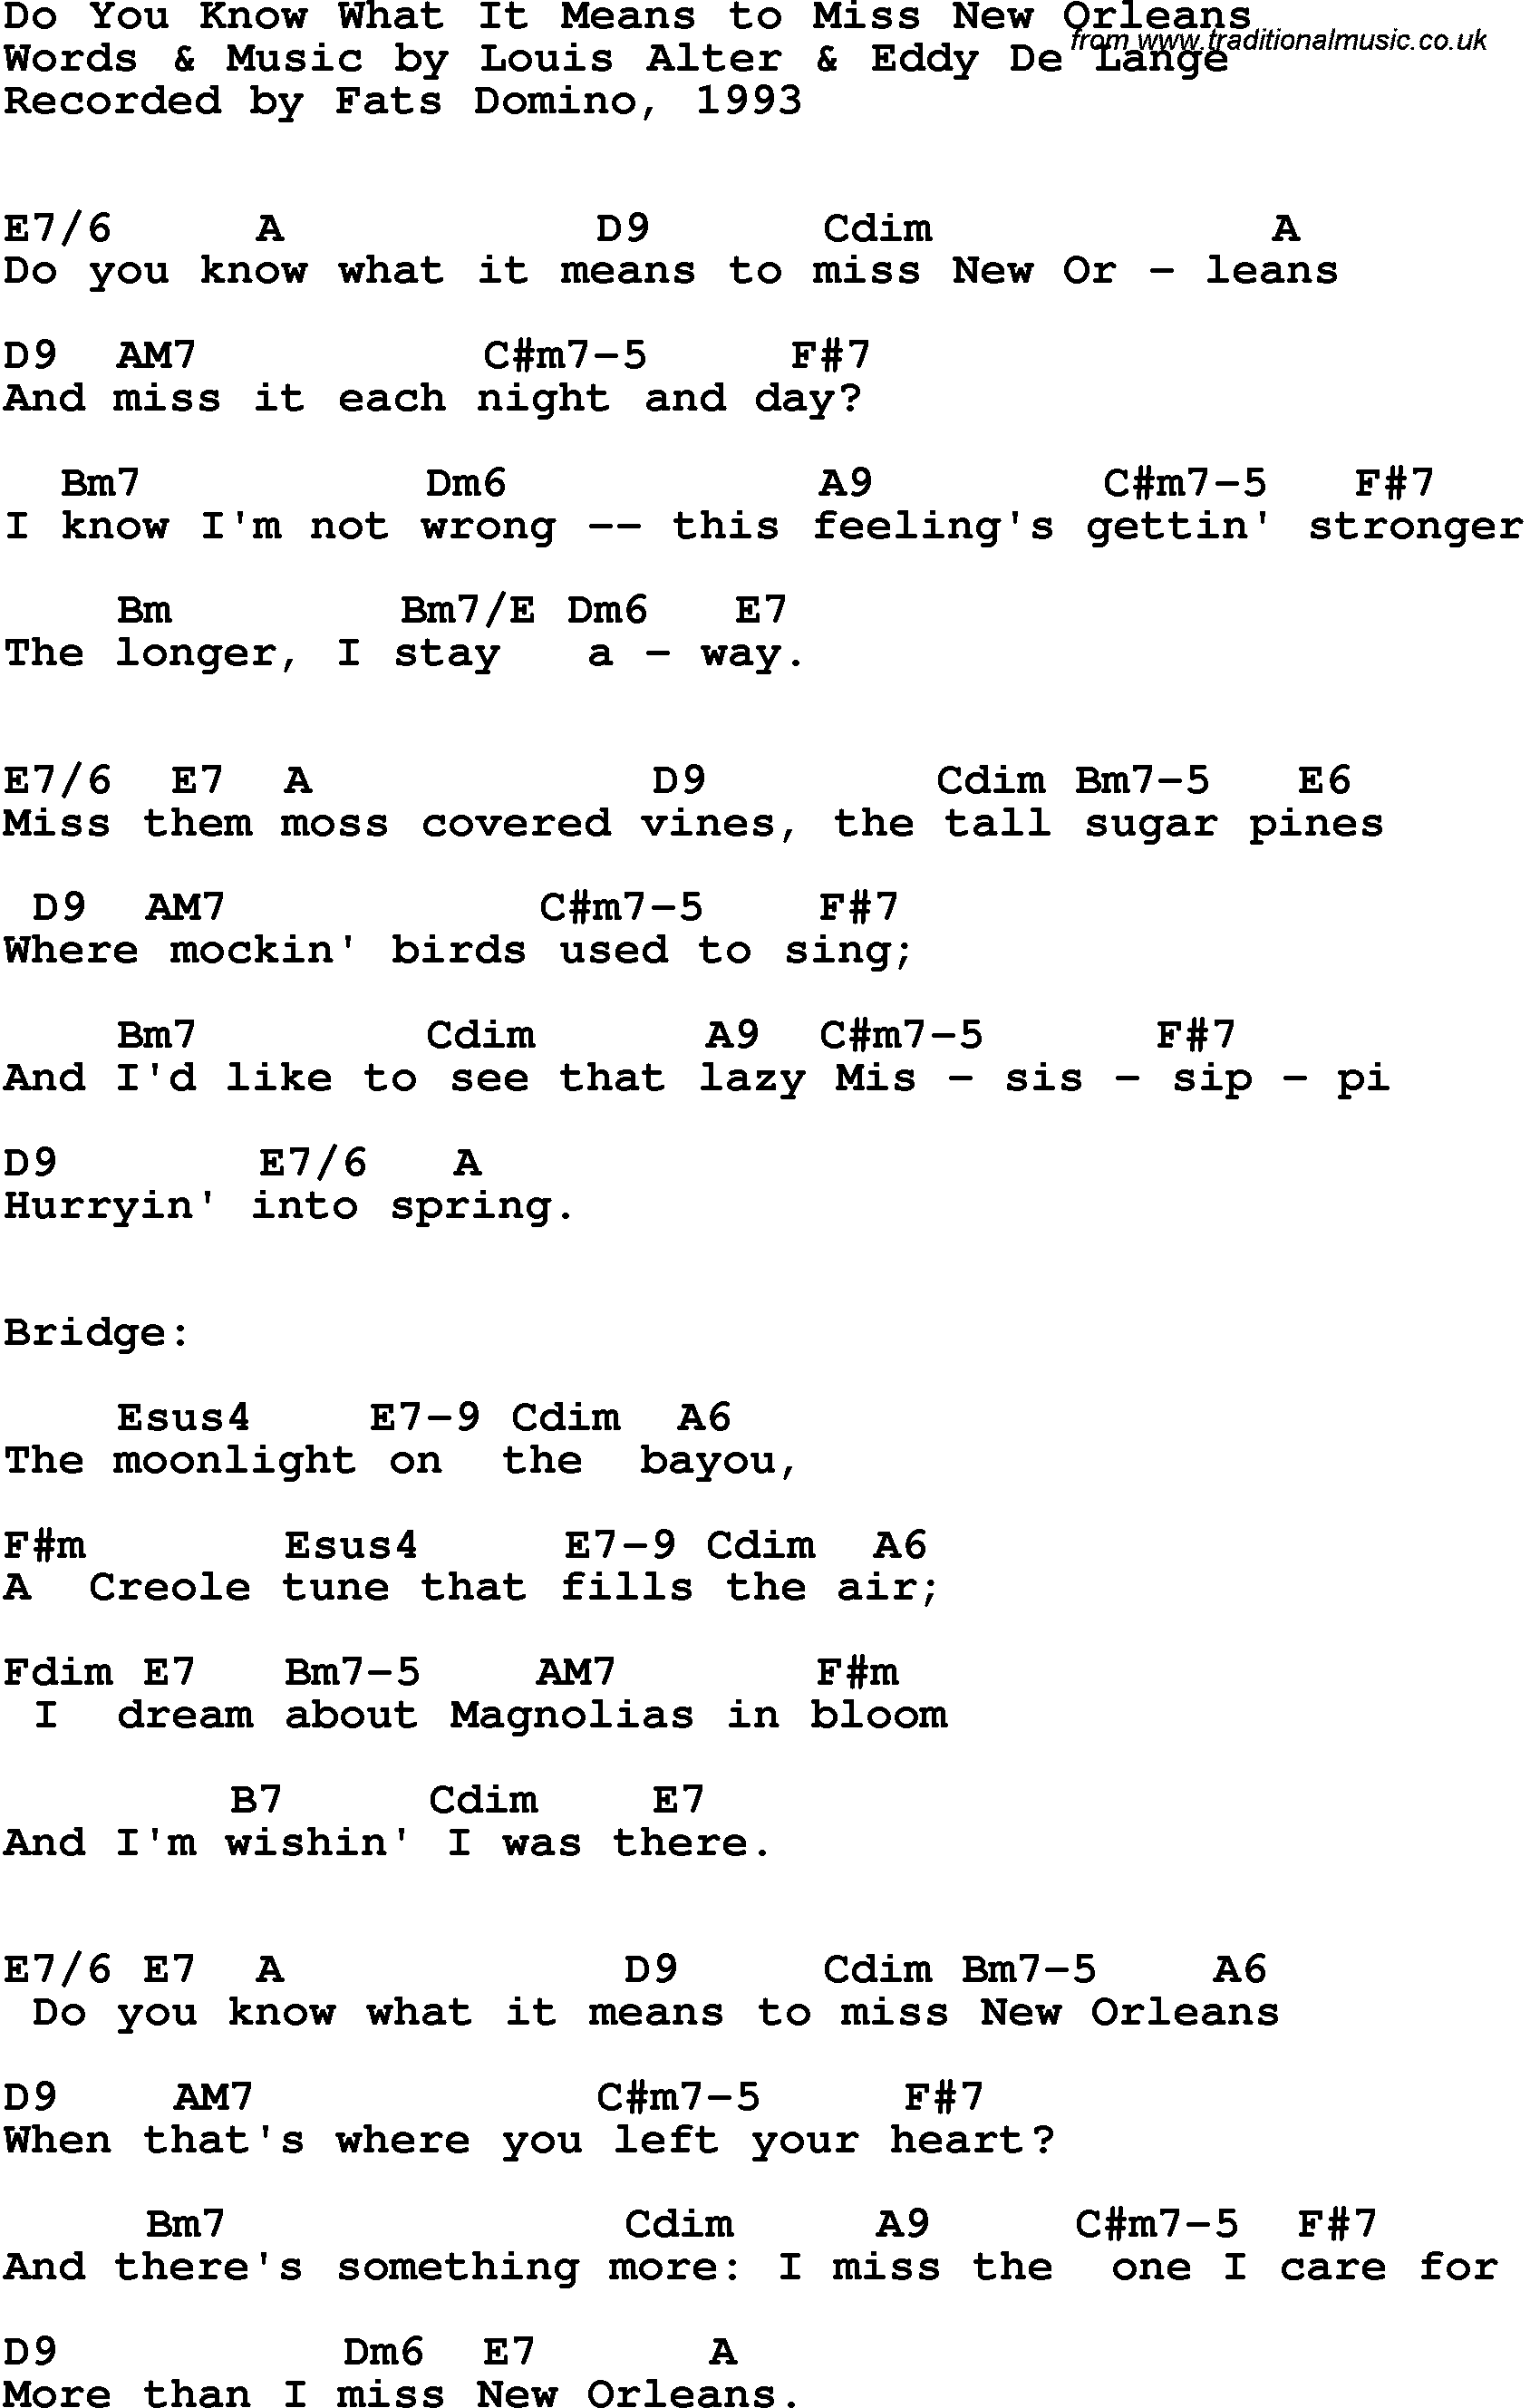 Song Lyrics with guitar chords for Do You Know What It Means To Miss New Orleans - Fats Domino, 1993